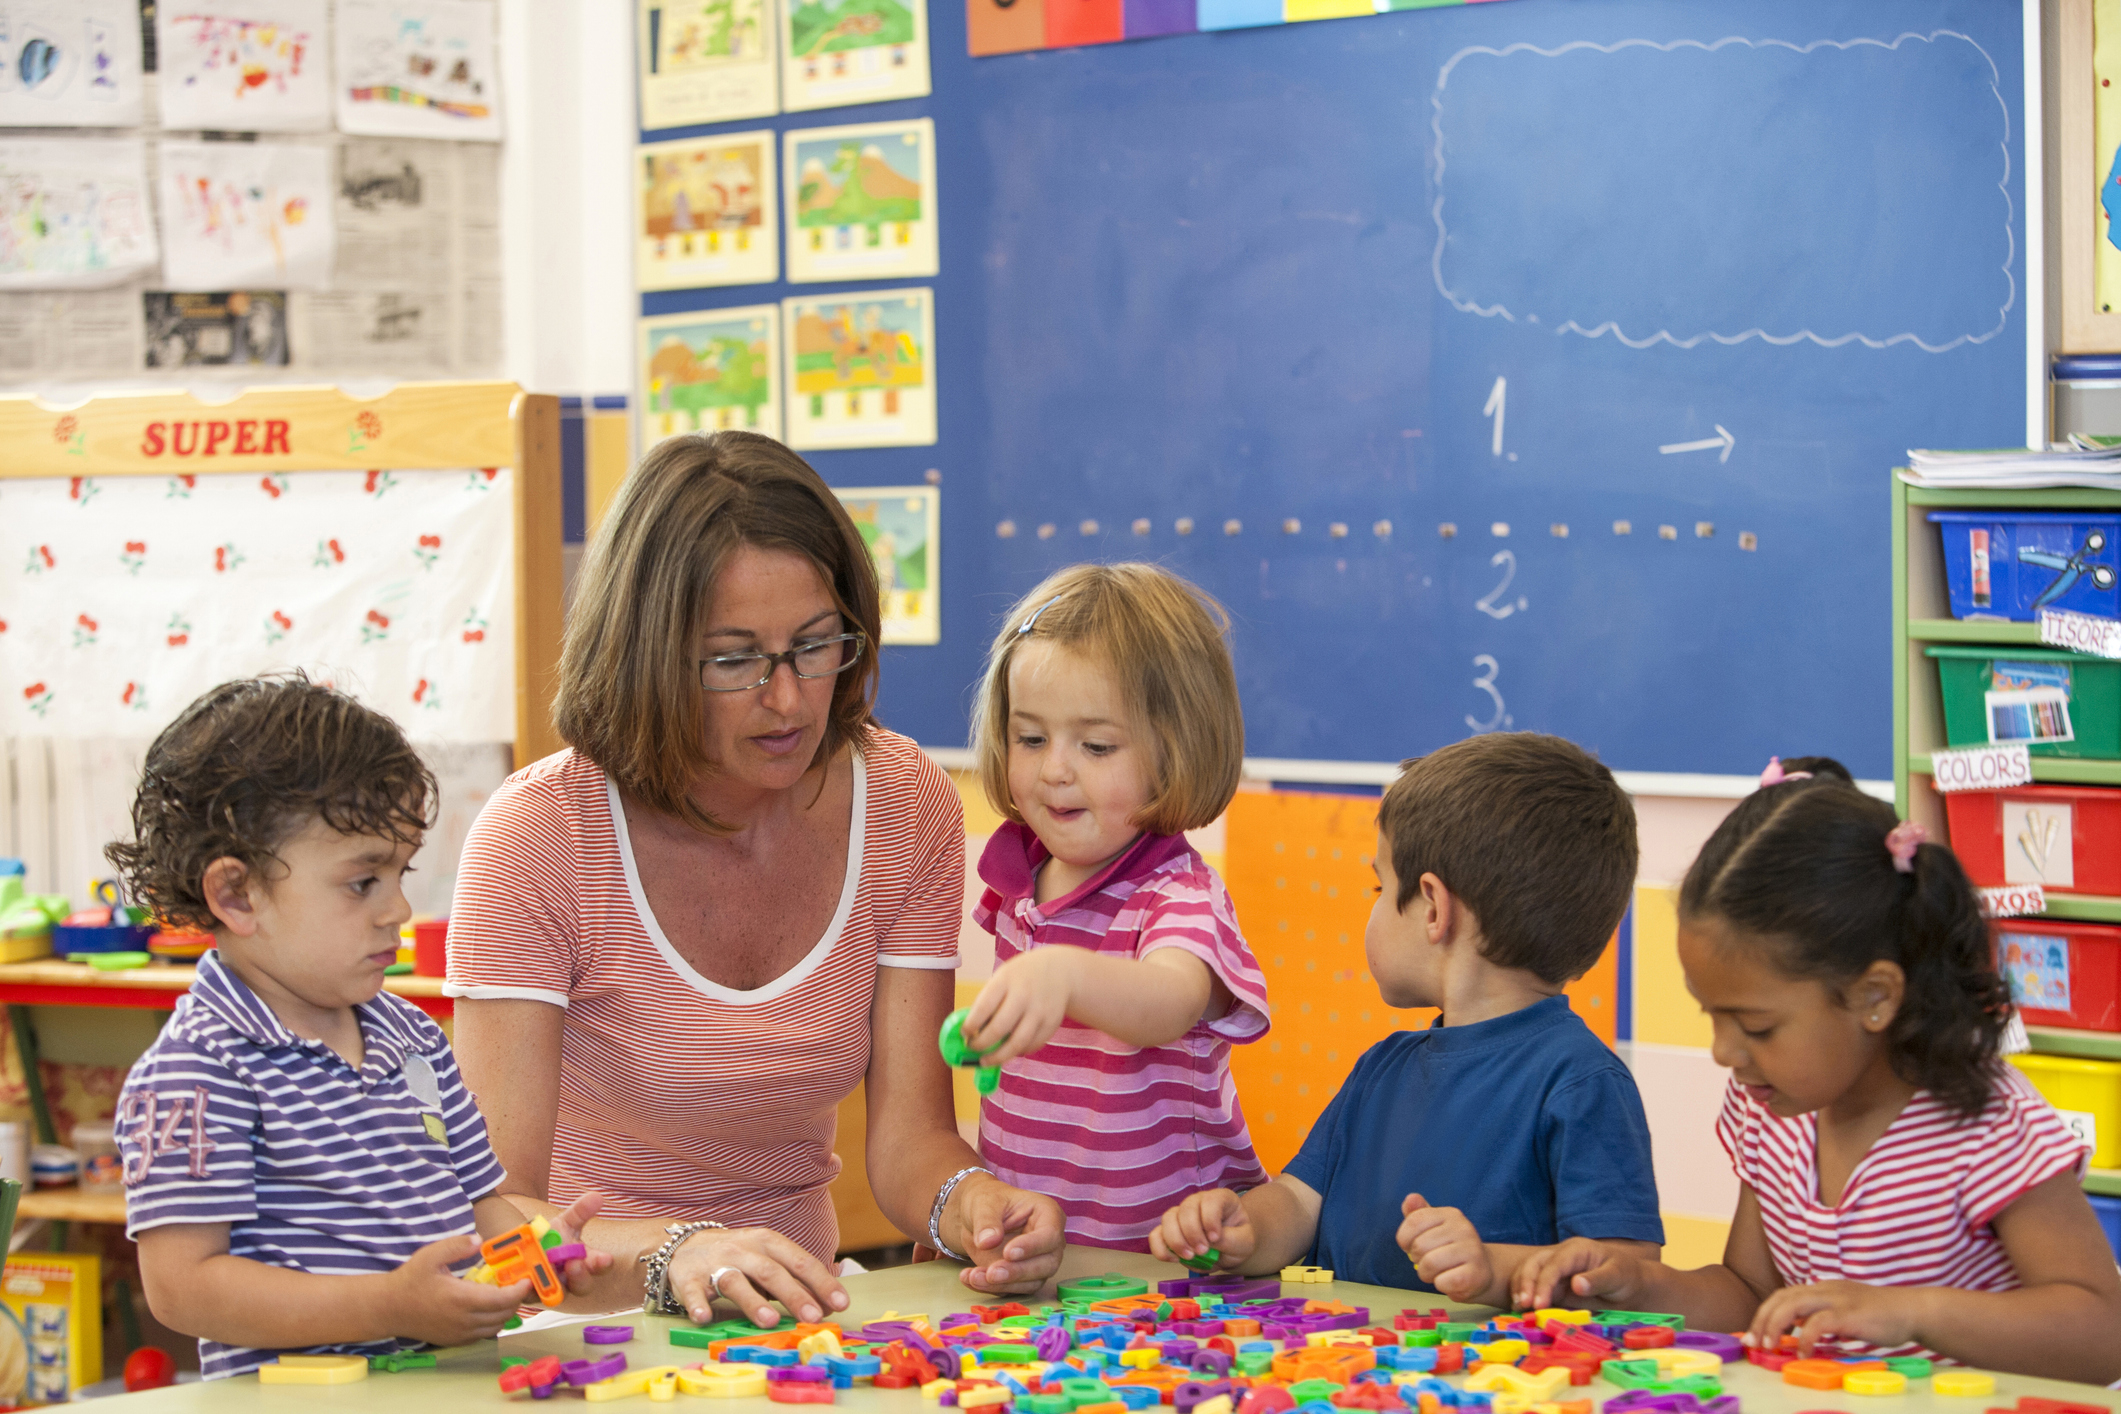 Teacher and four children engaging with colorful building blocks on a table in a classroom